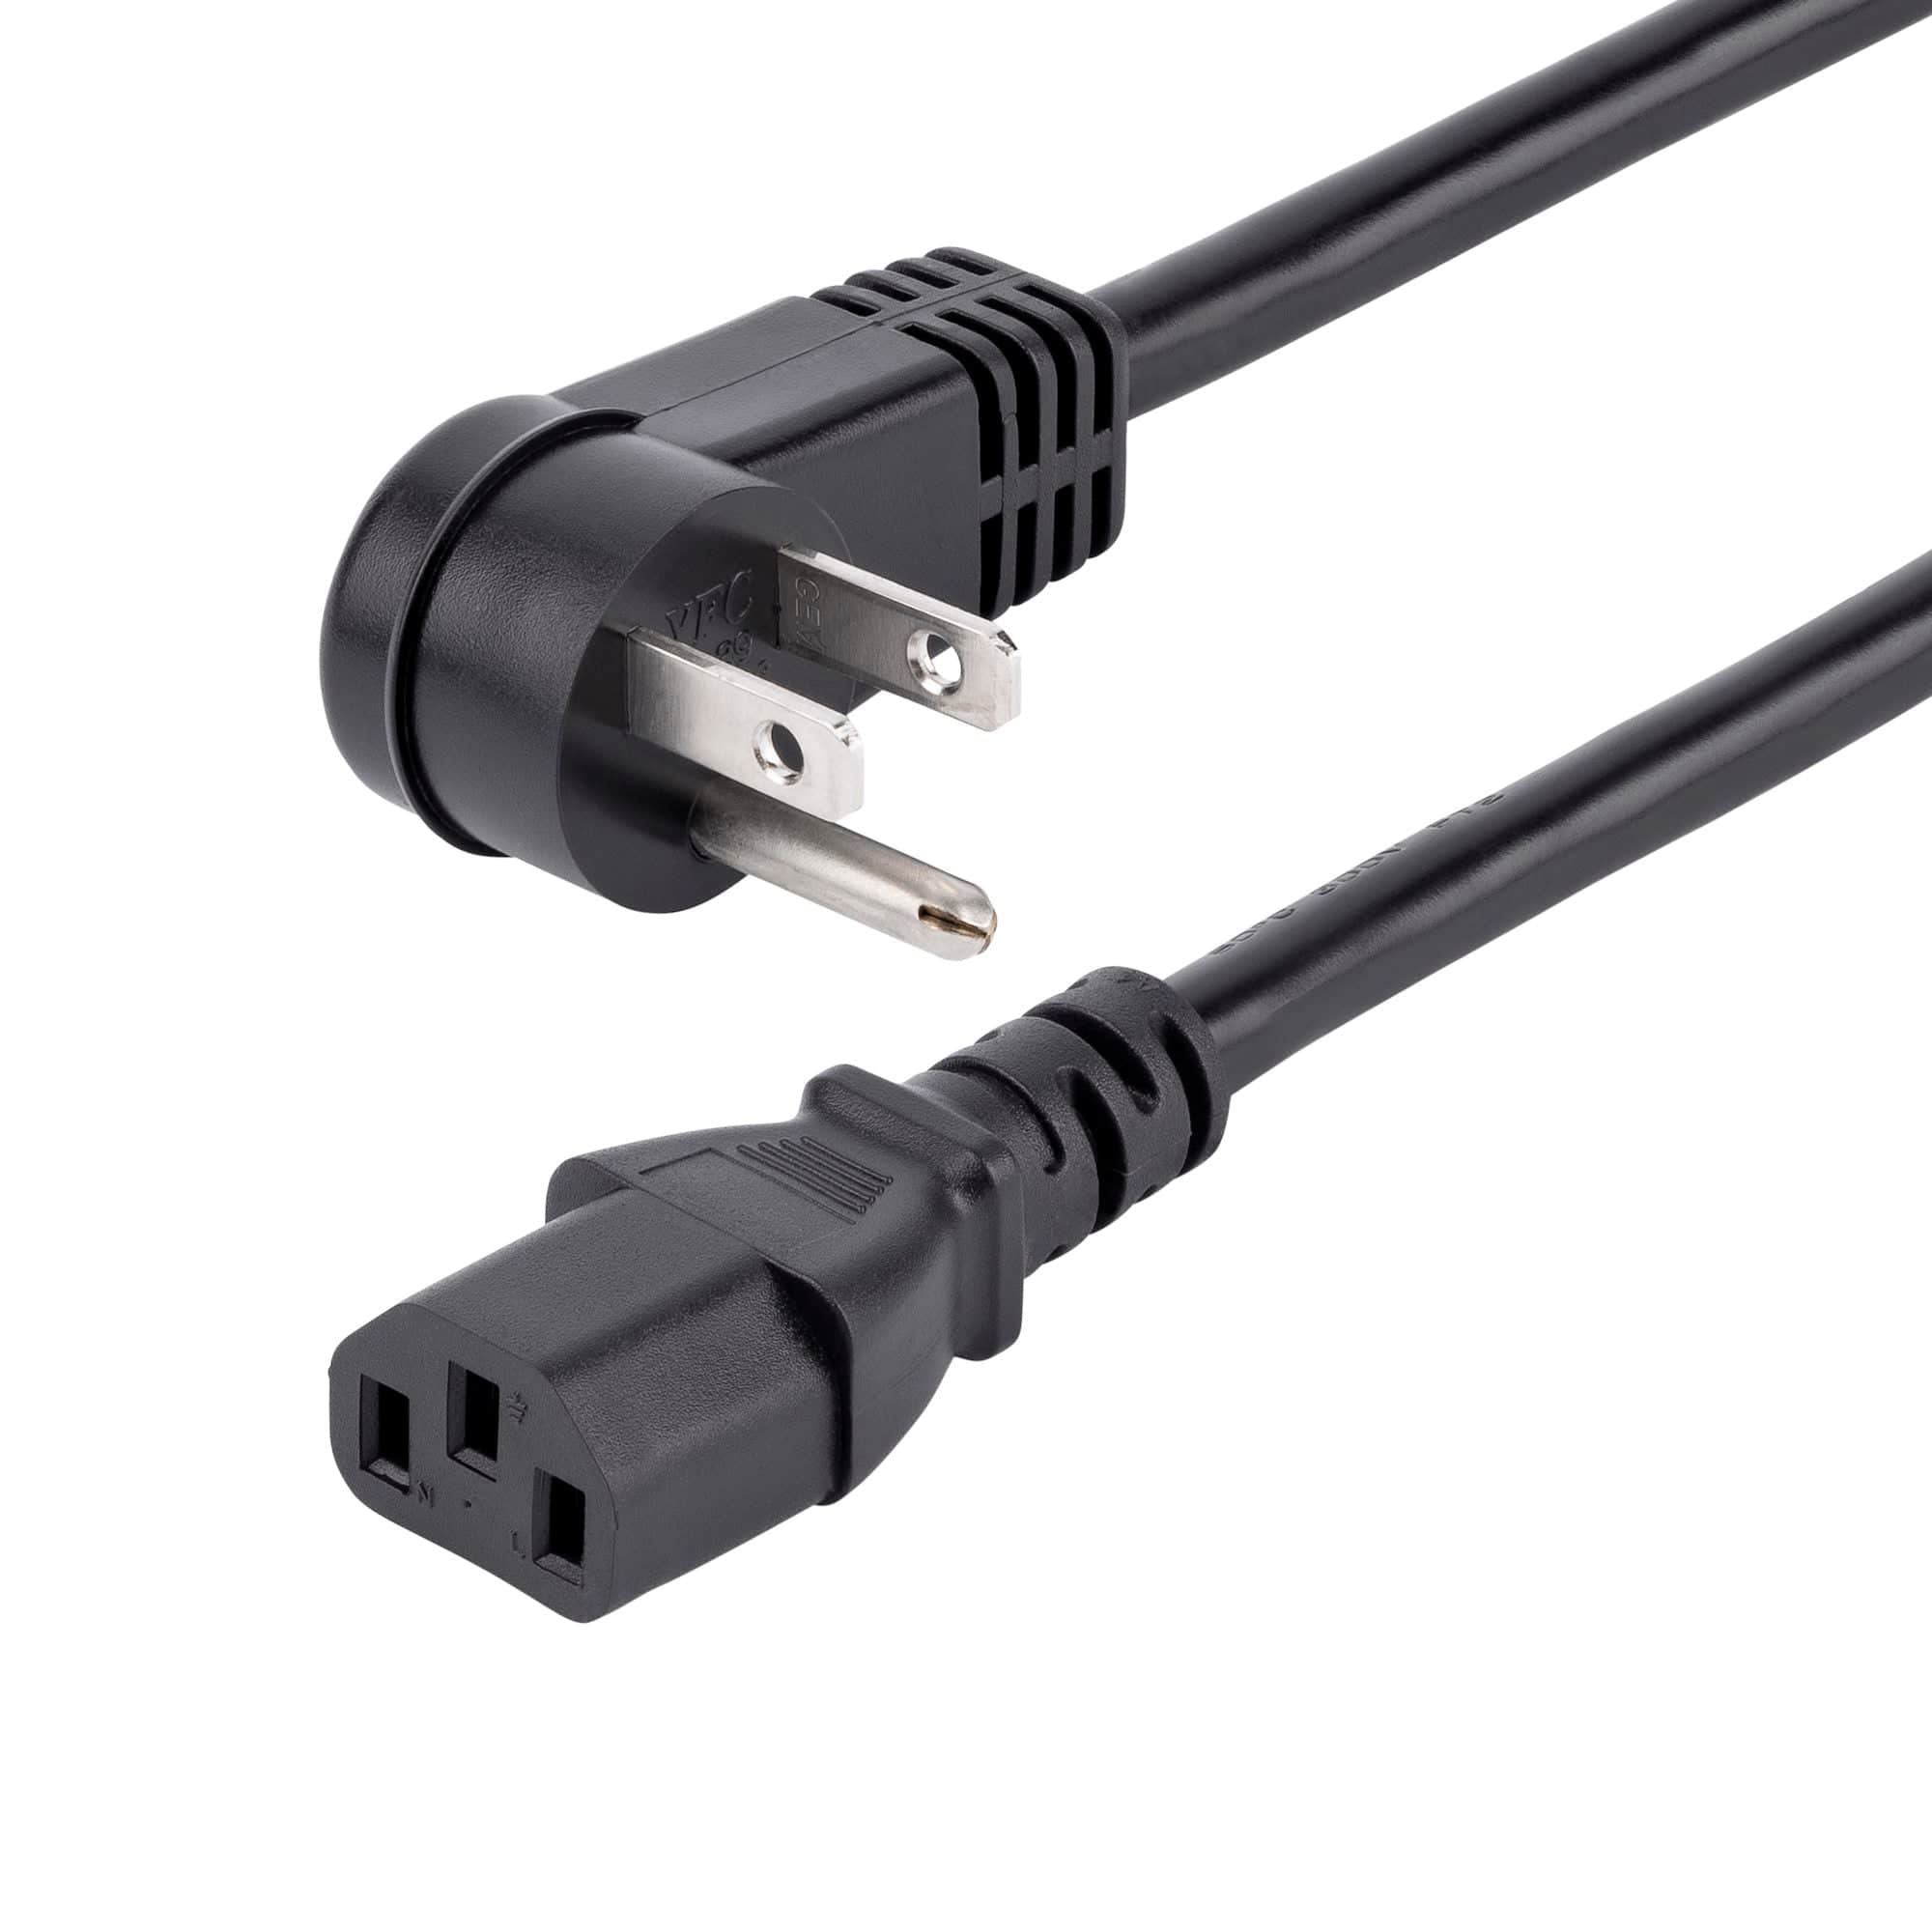 Startech PXTR1016 6ft (2m) Computer Power Cord, Right Angle NEMA 5-15P to C13, 10A 125V, 18AWG, Black Replacement AC Power Cord, Printer Power Cord, PC Power Supply Cable, Monitor Power Cable - UL Listed